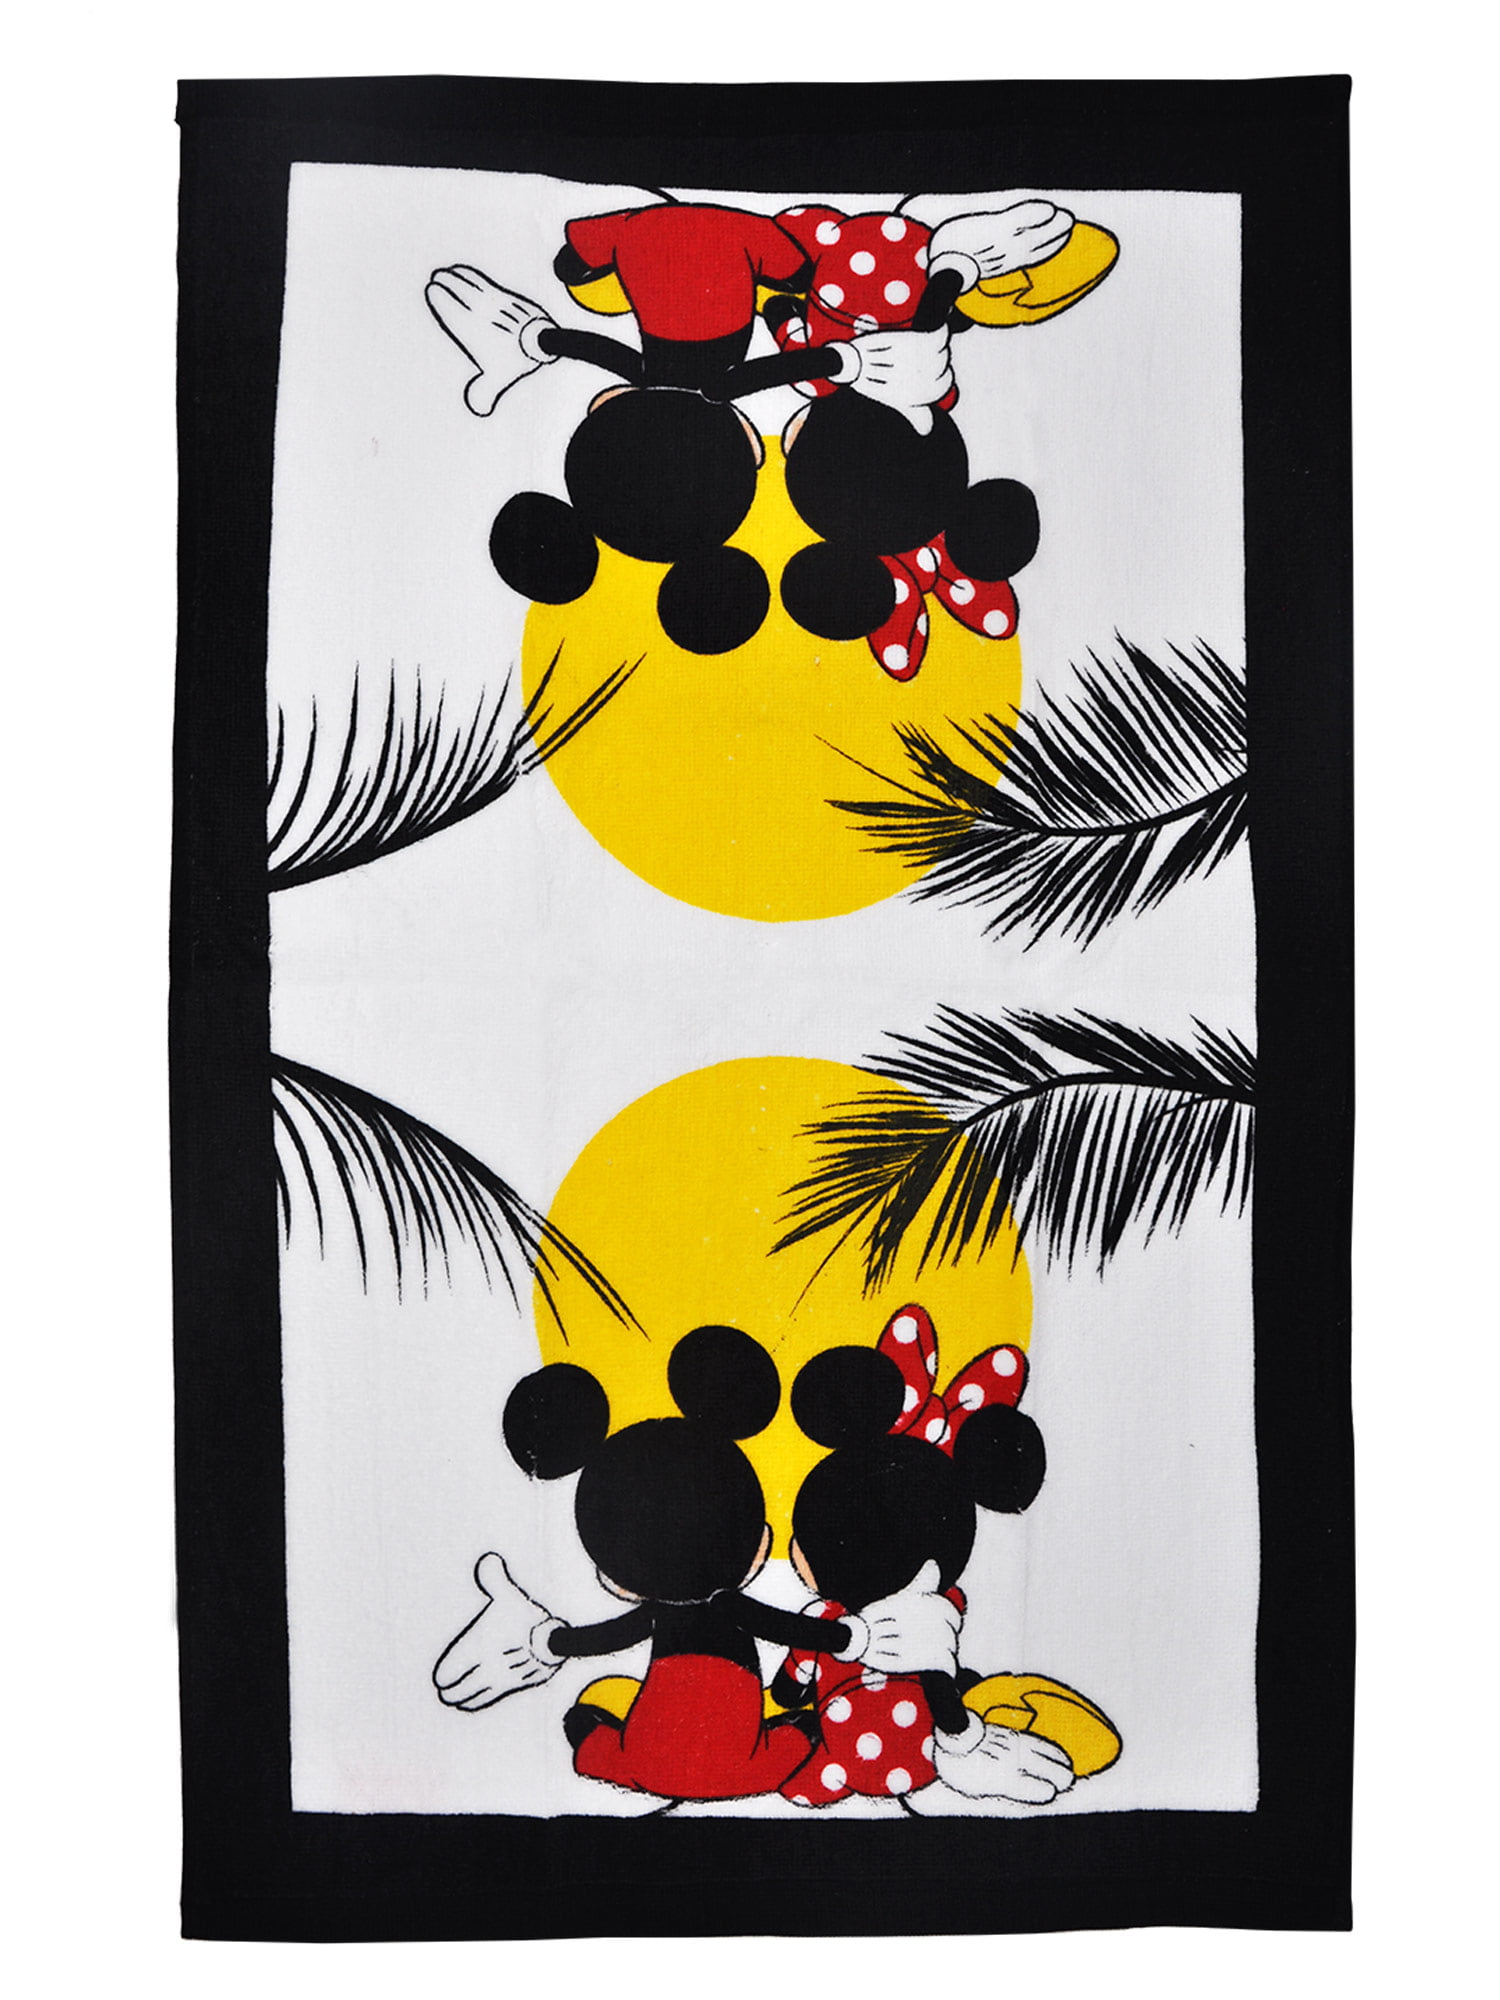 Disney Mickey Mouse Minnie Mouse 6 pc Kitchen Set Silicon Mitts Dish Towels